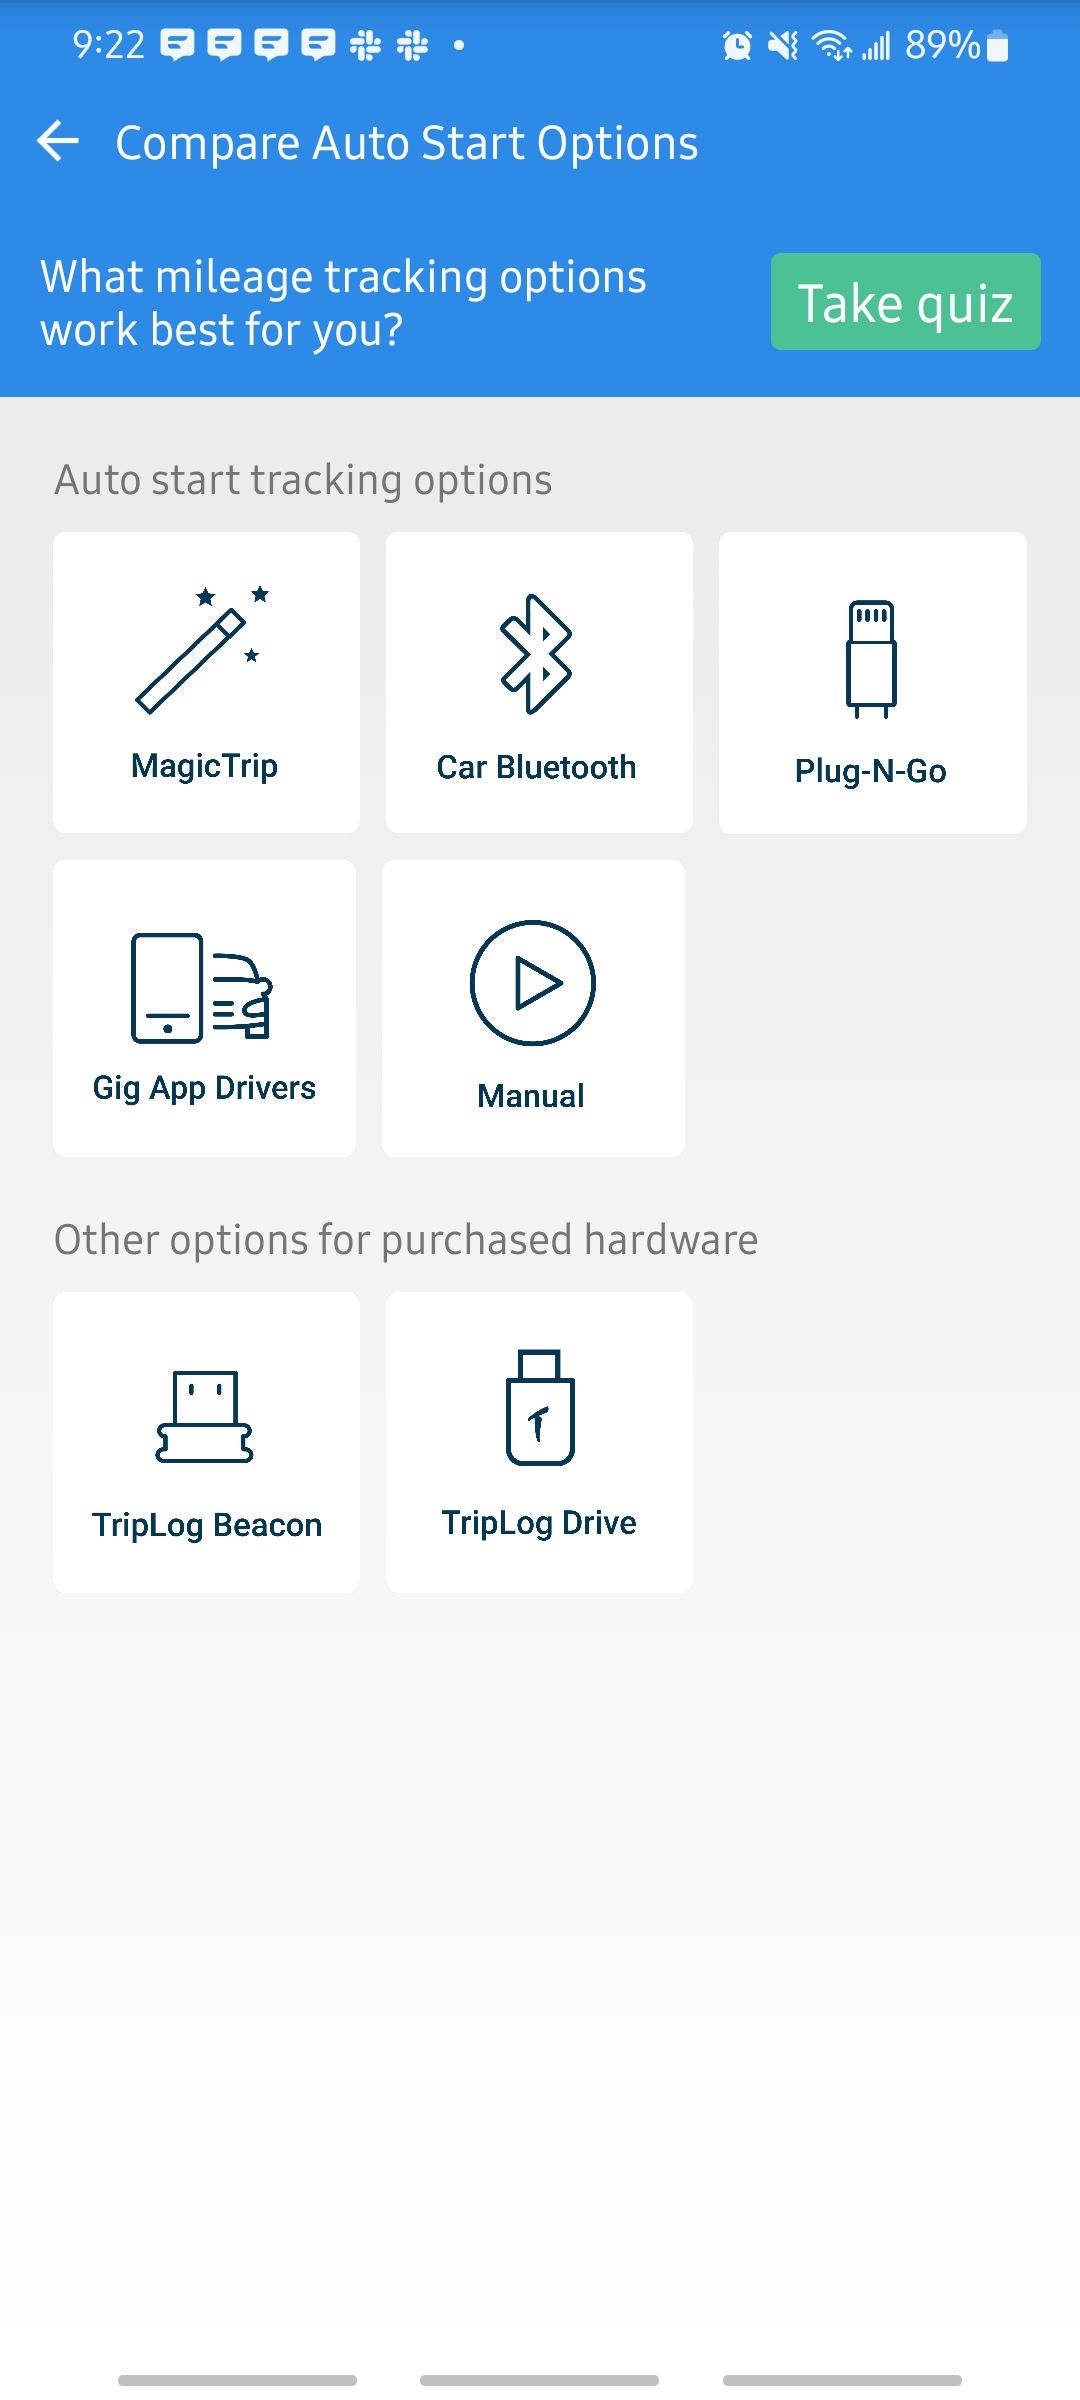 triplog app comparing auto start options for ease